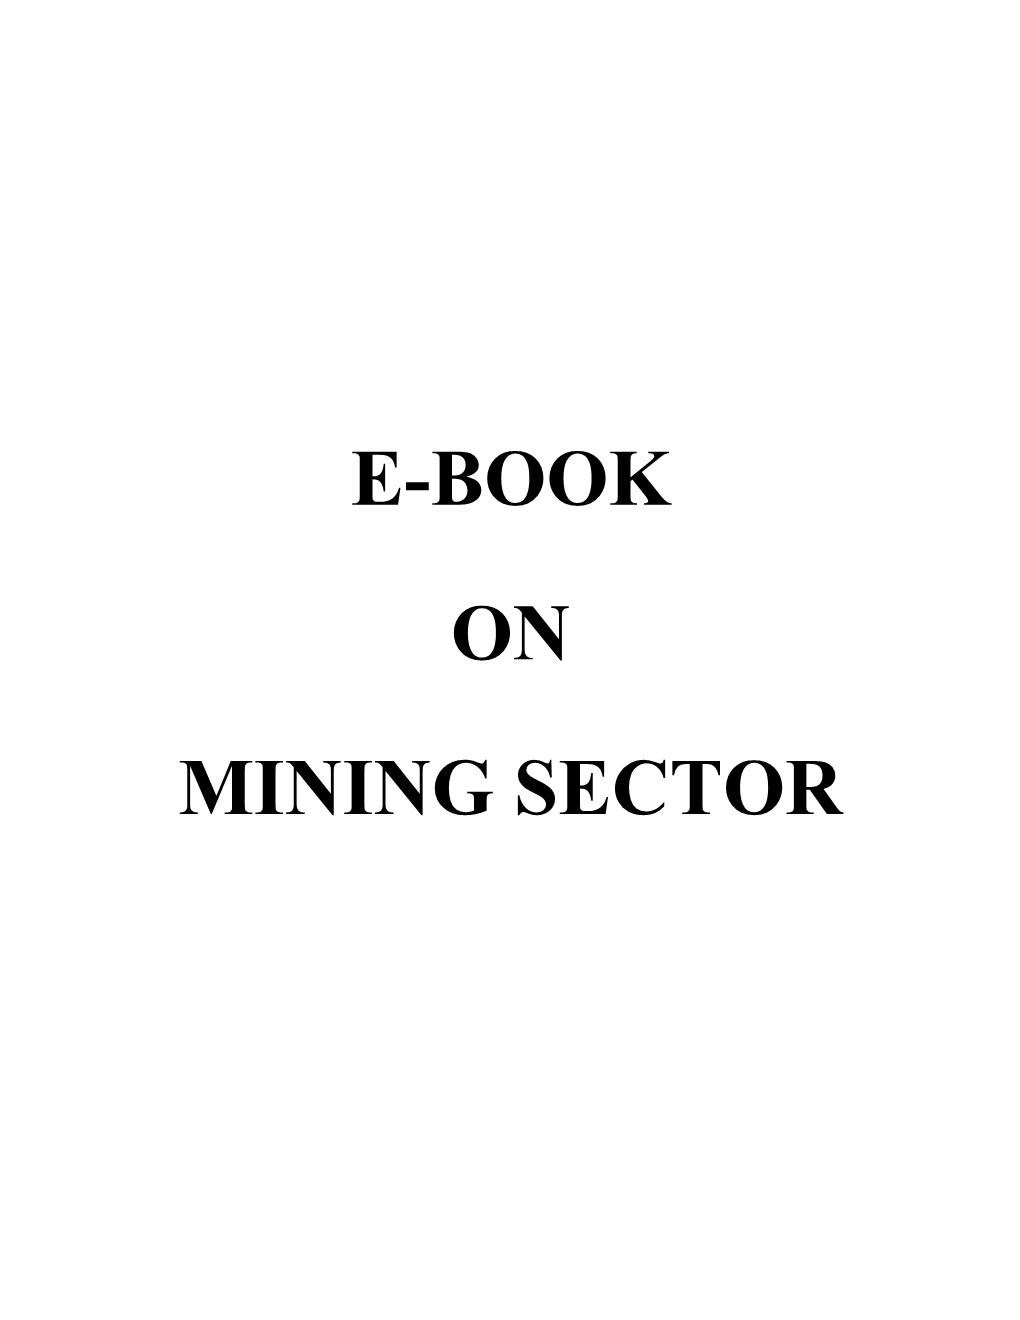 E-Book on Mining Sector